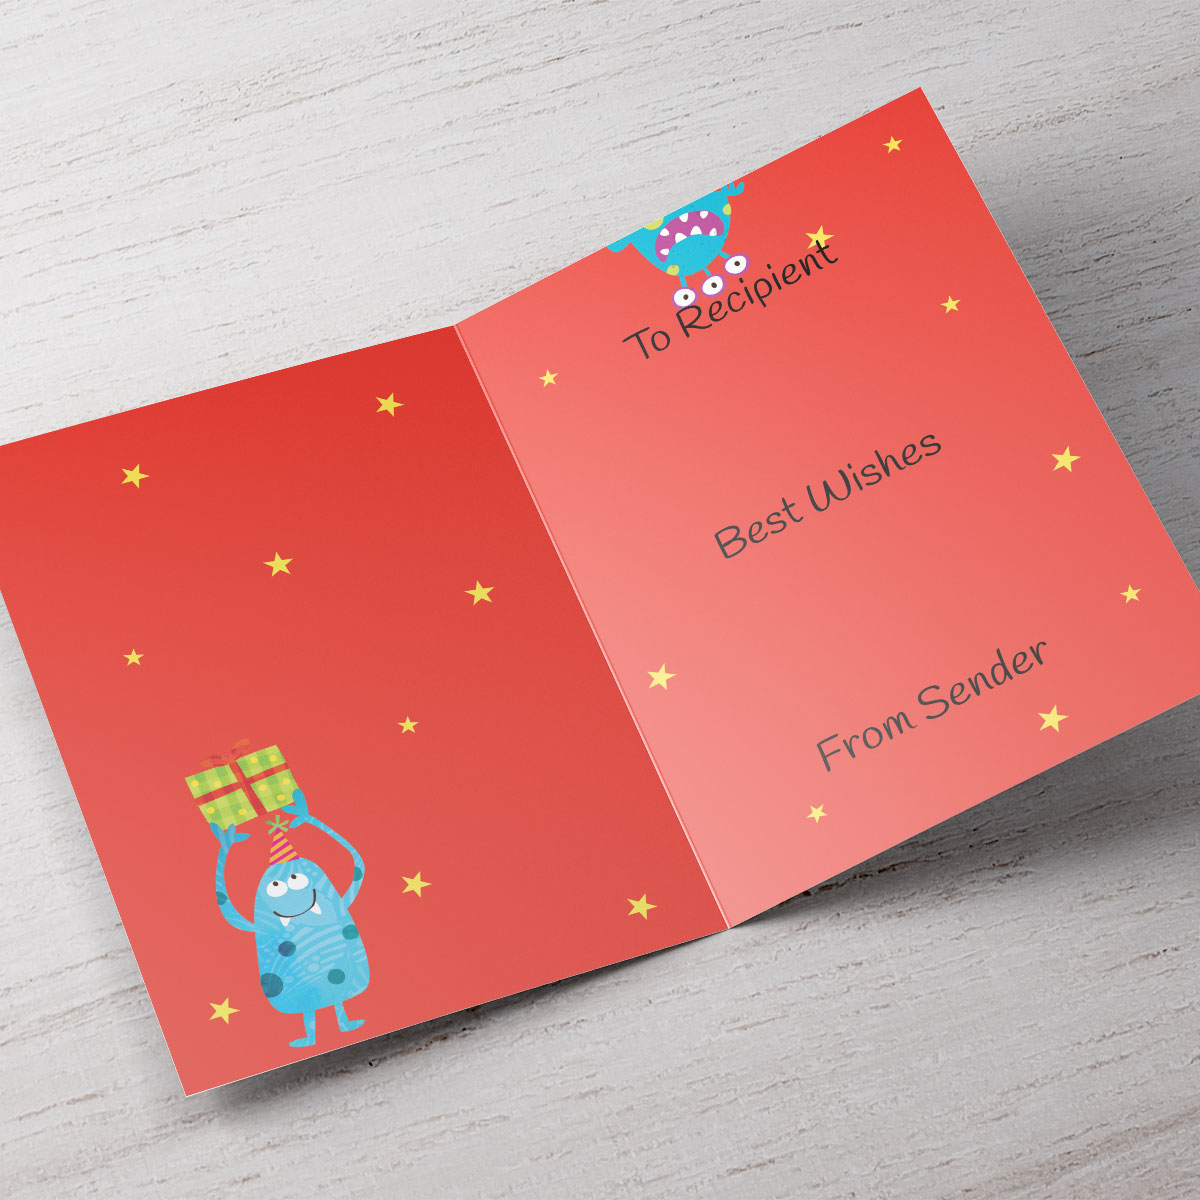 Personalised Card - Have A Monster Birthday